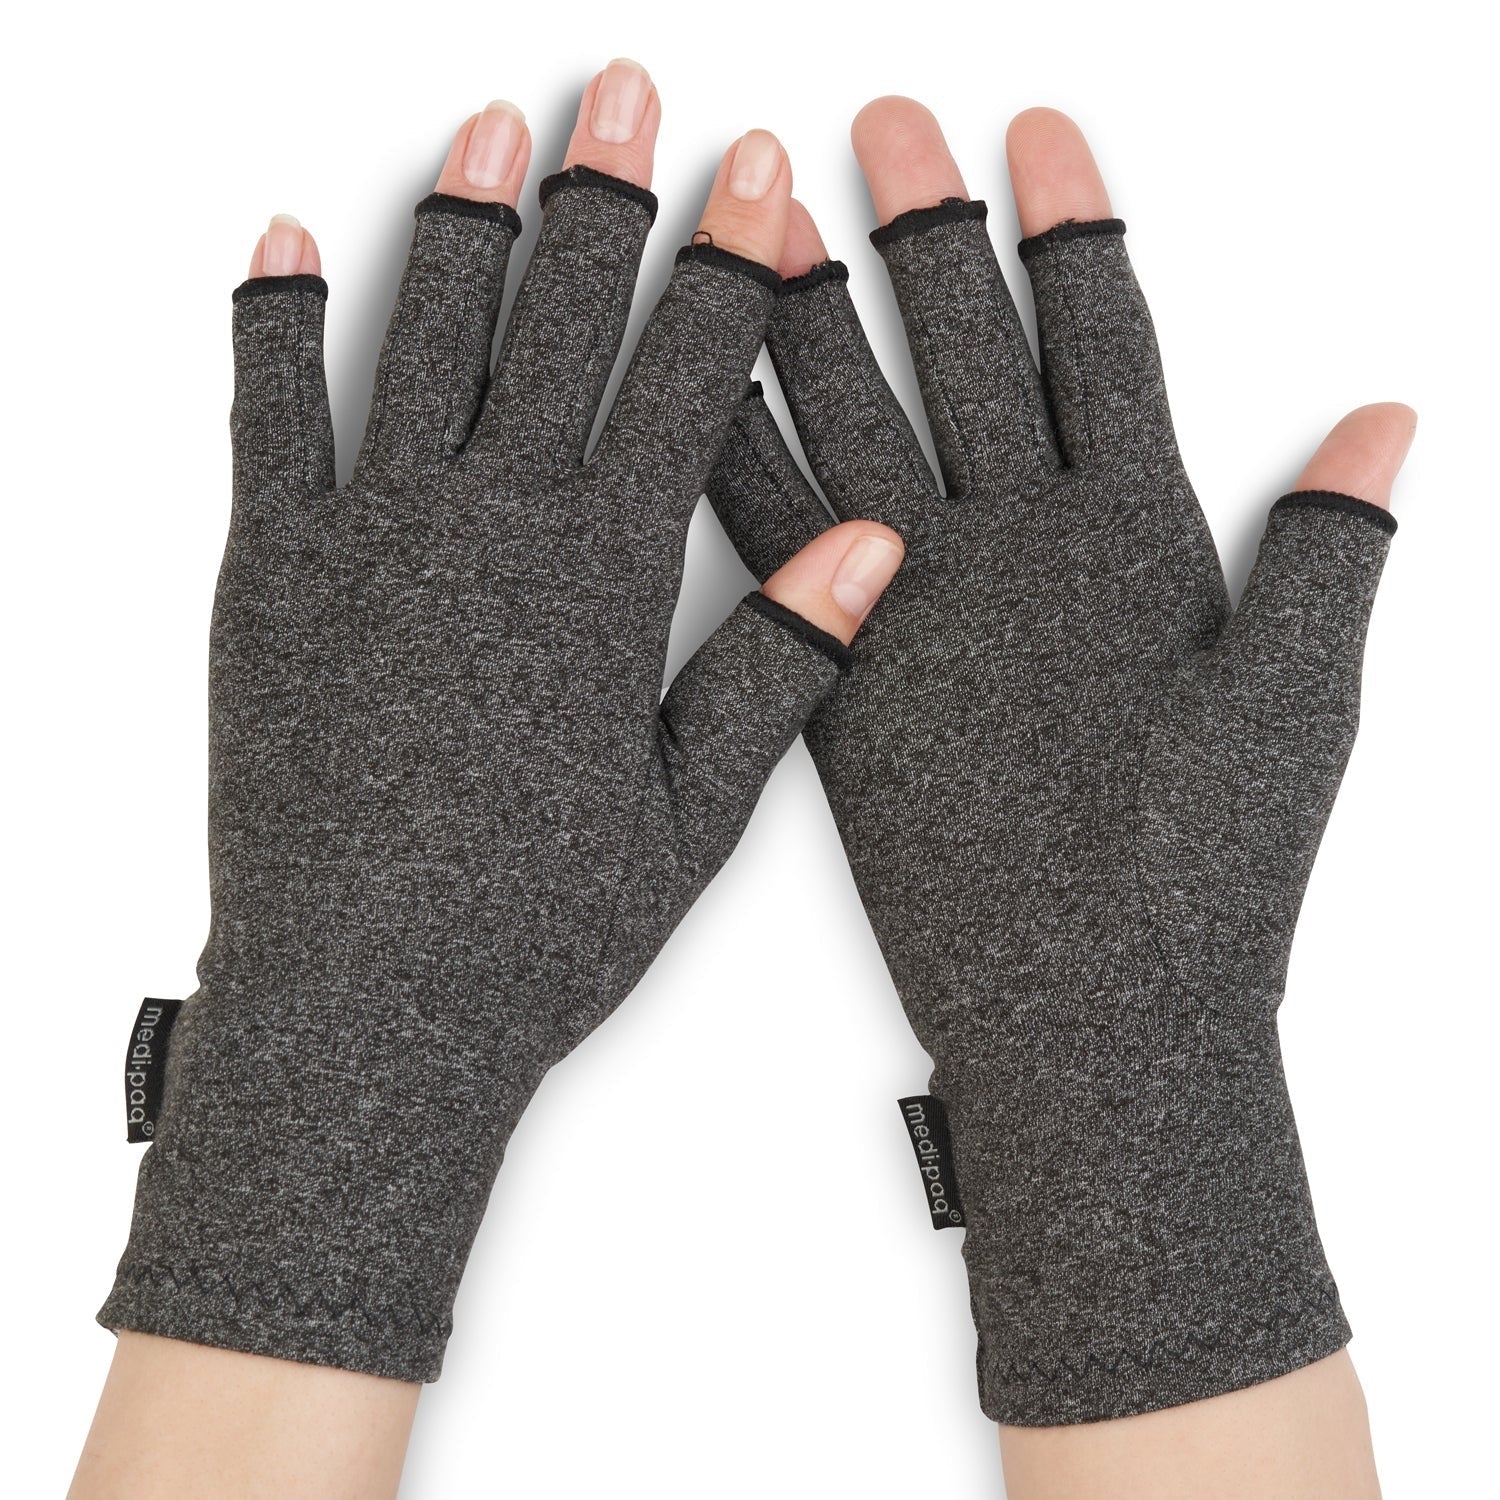 Arthritis Gloves: How They Can Help Relieve Joint Pain